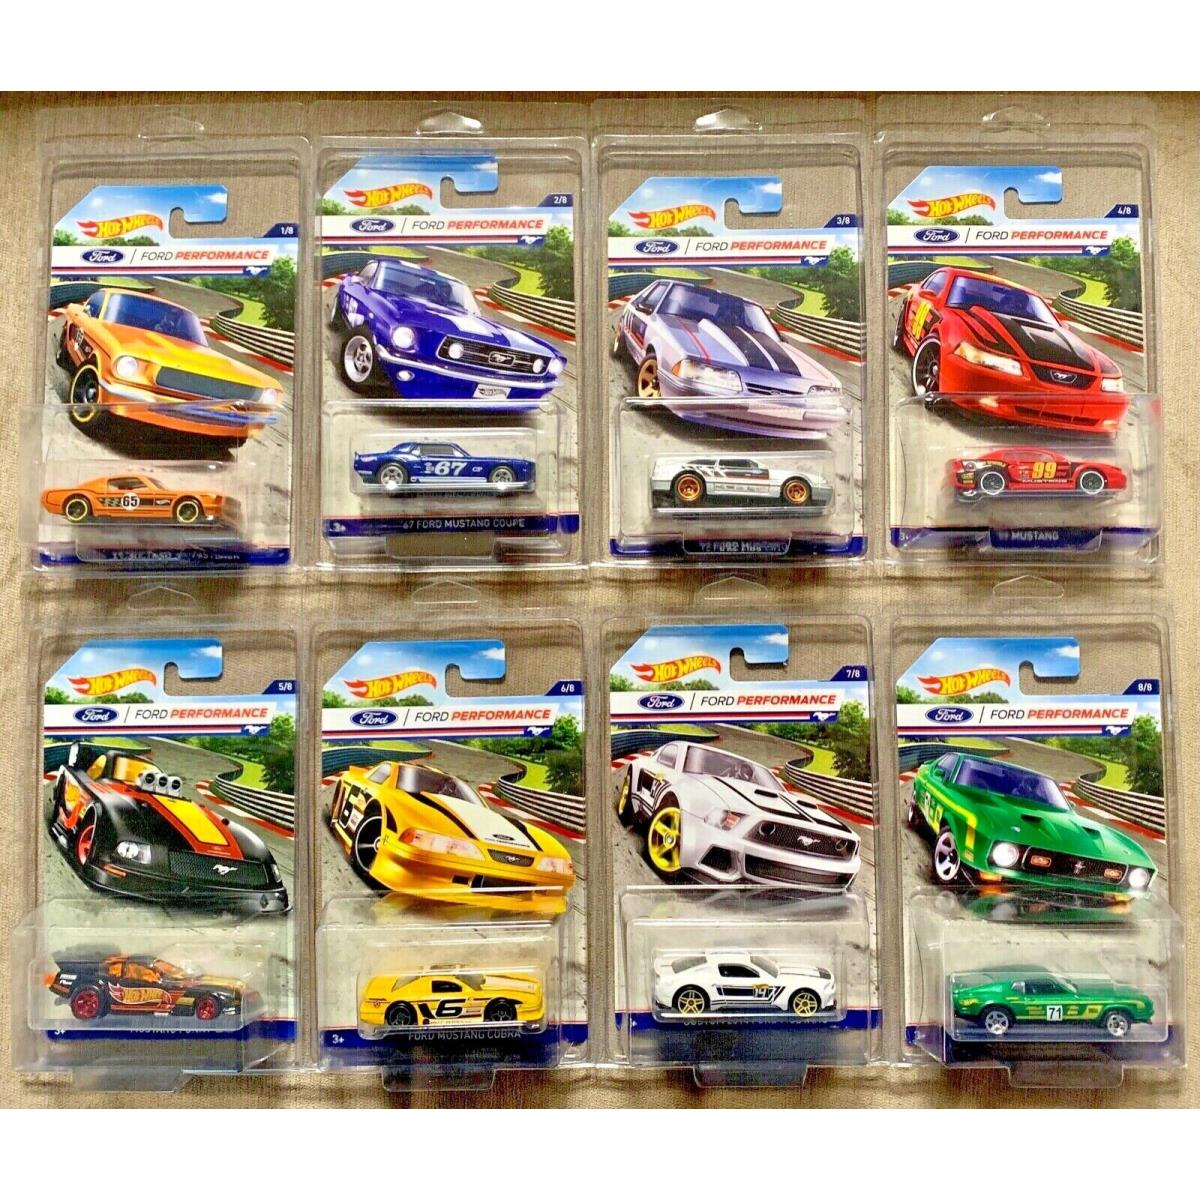 Hot Wheels 2016 Ford/ford Performance Set DJK85 1:64 Scale Die-cast Set of 8